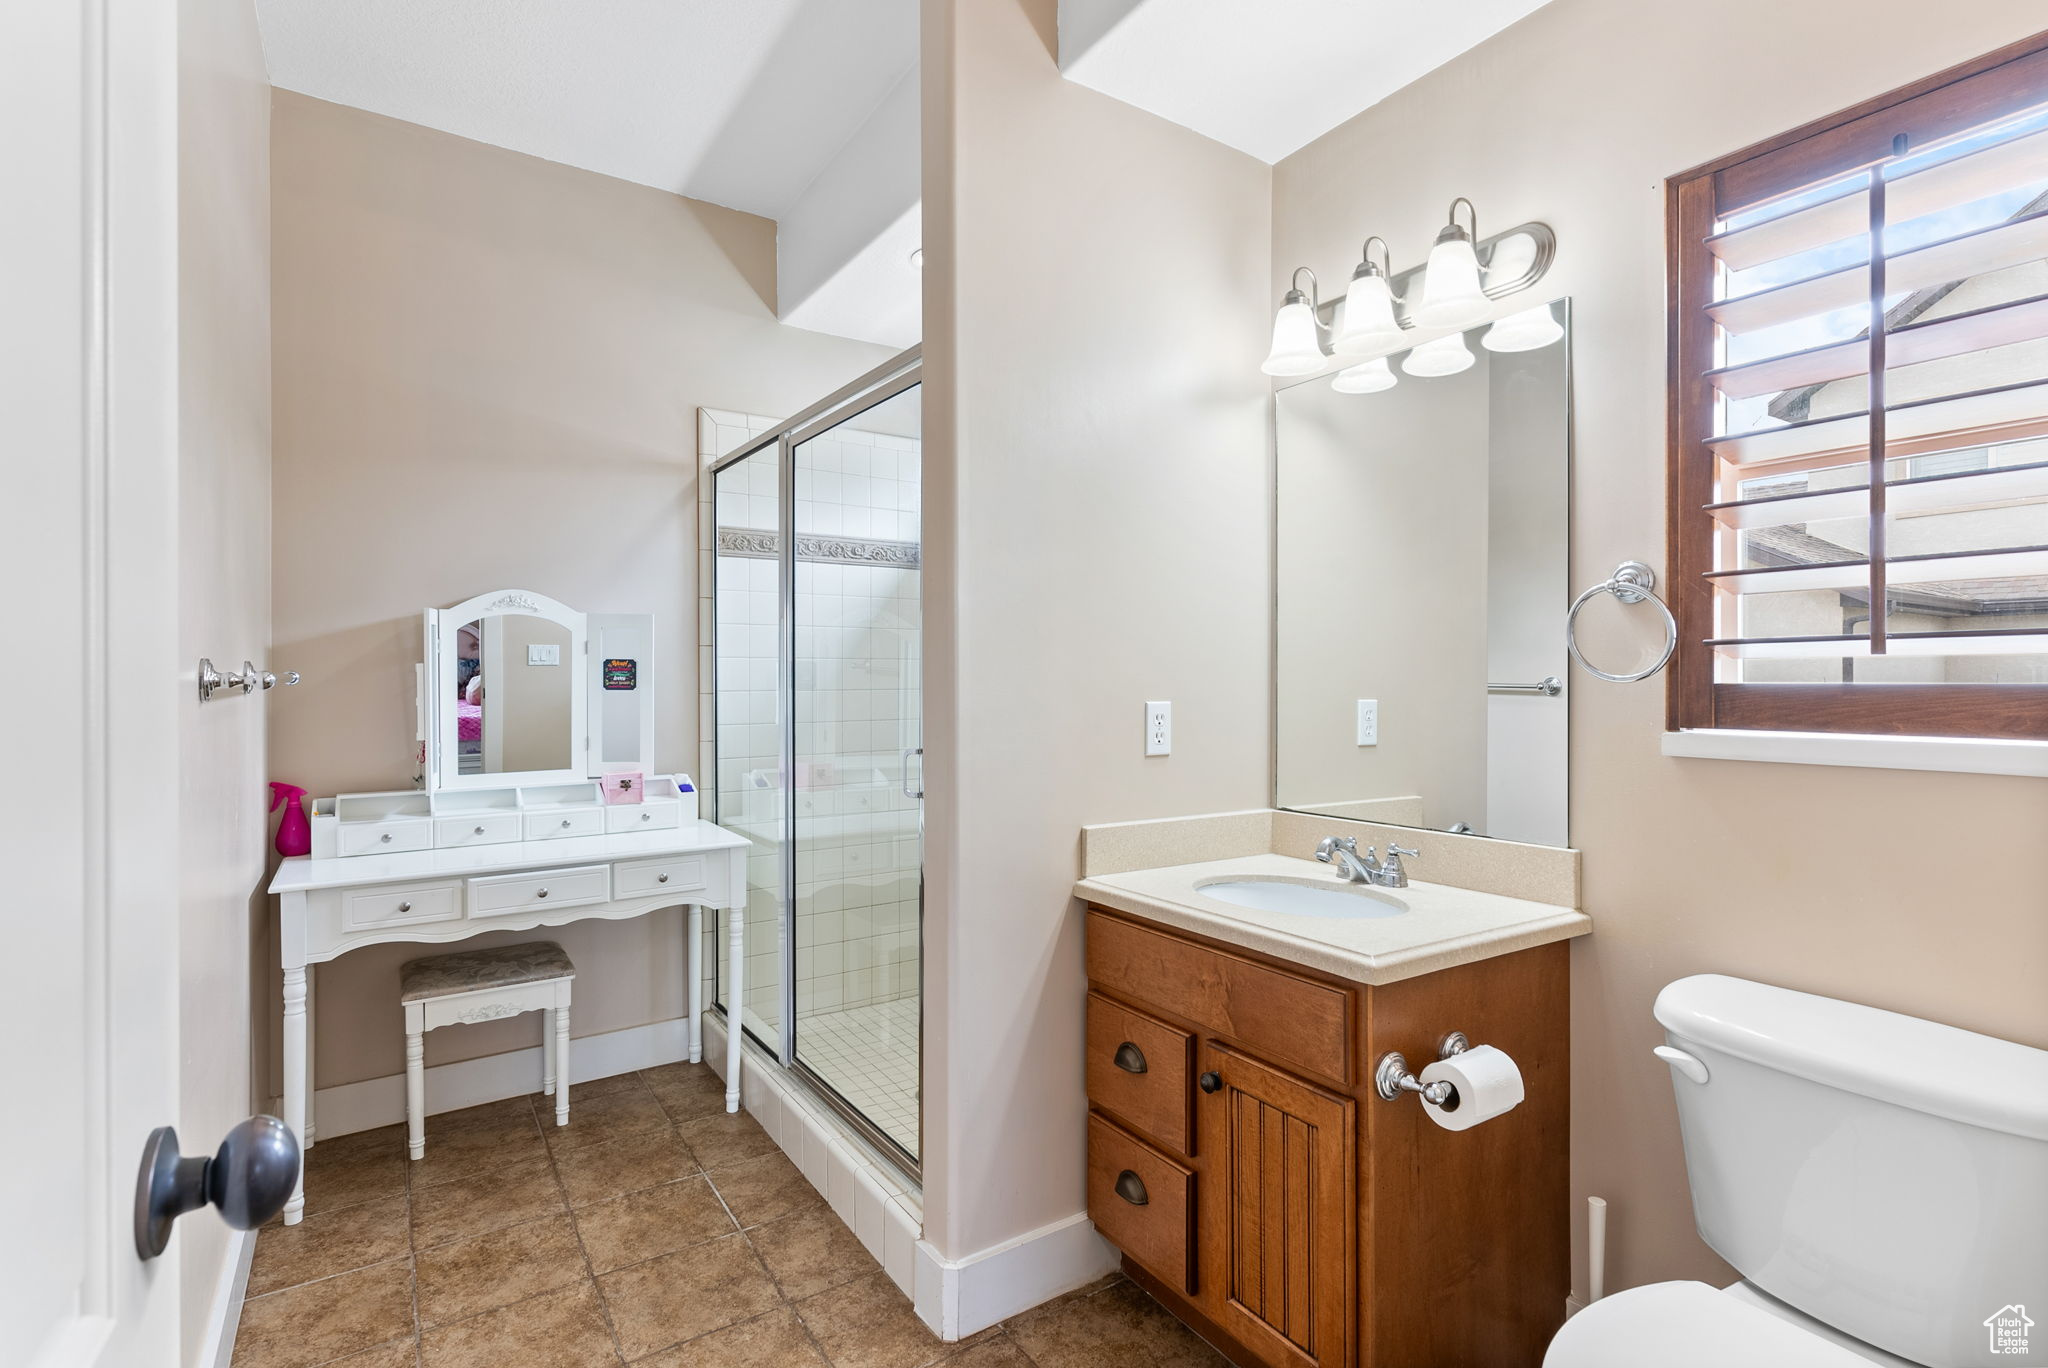 Bathroom featuring tile flooring, a shower with shower door, vanity with extensive cabinet space, and toilet